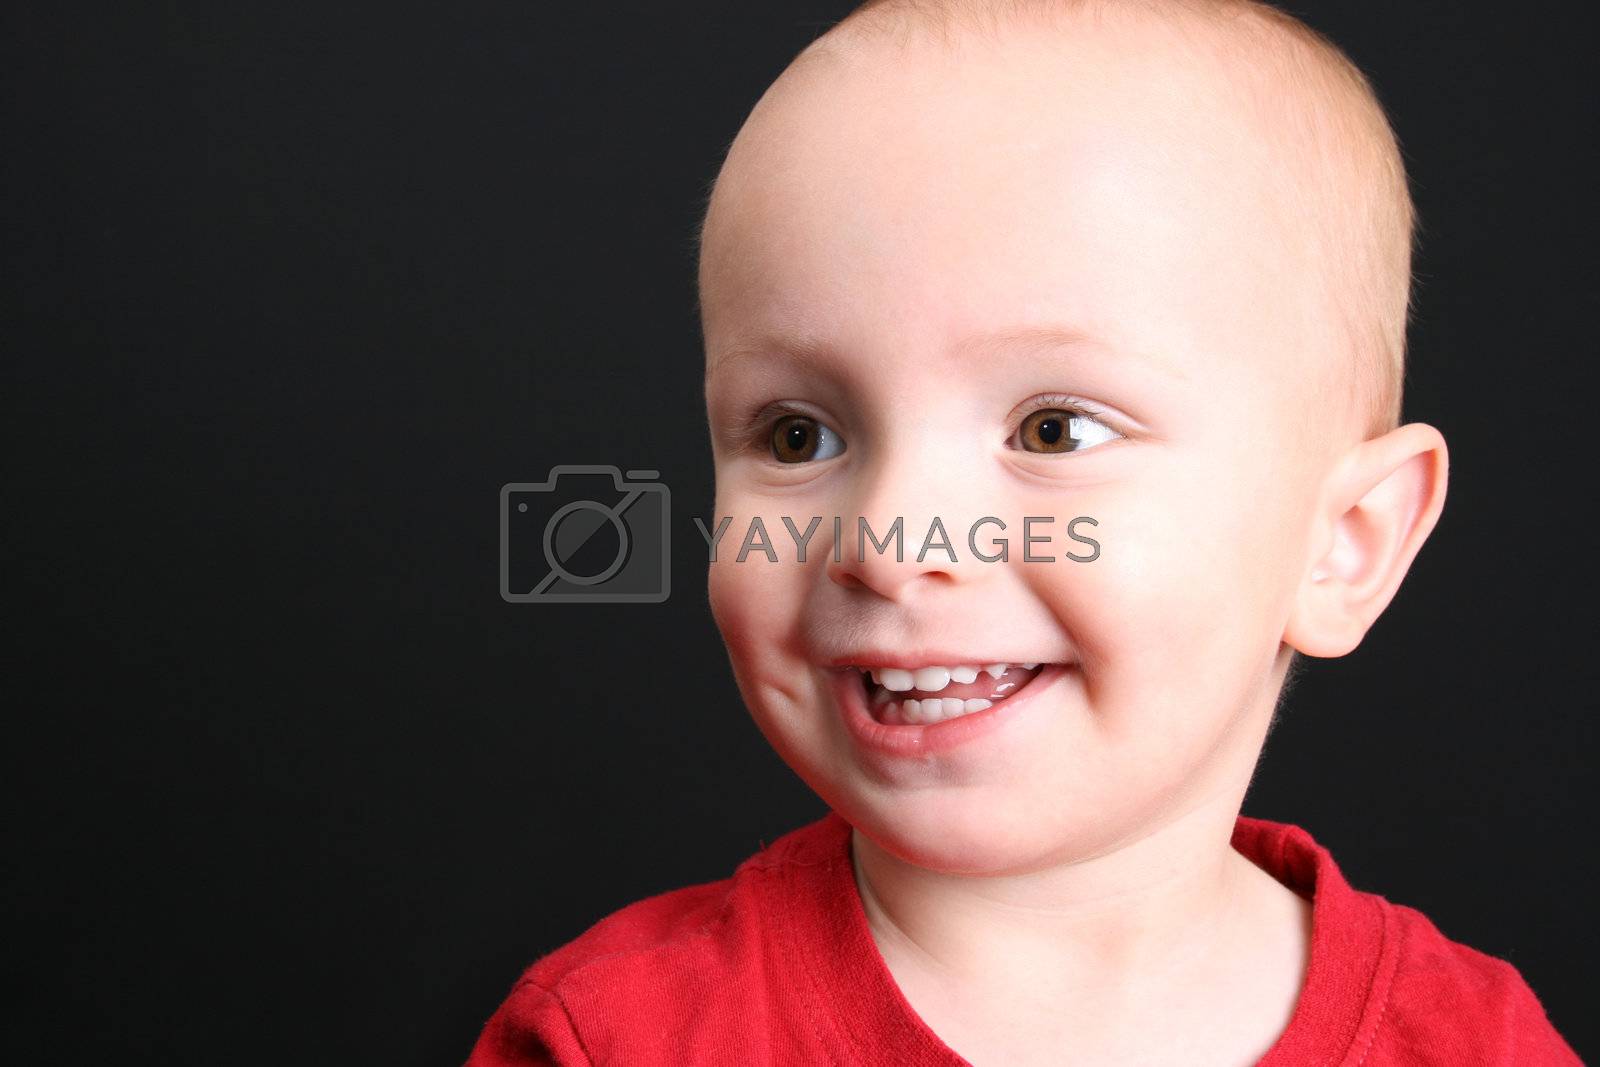 Royalty free image of Toddler by vanell